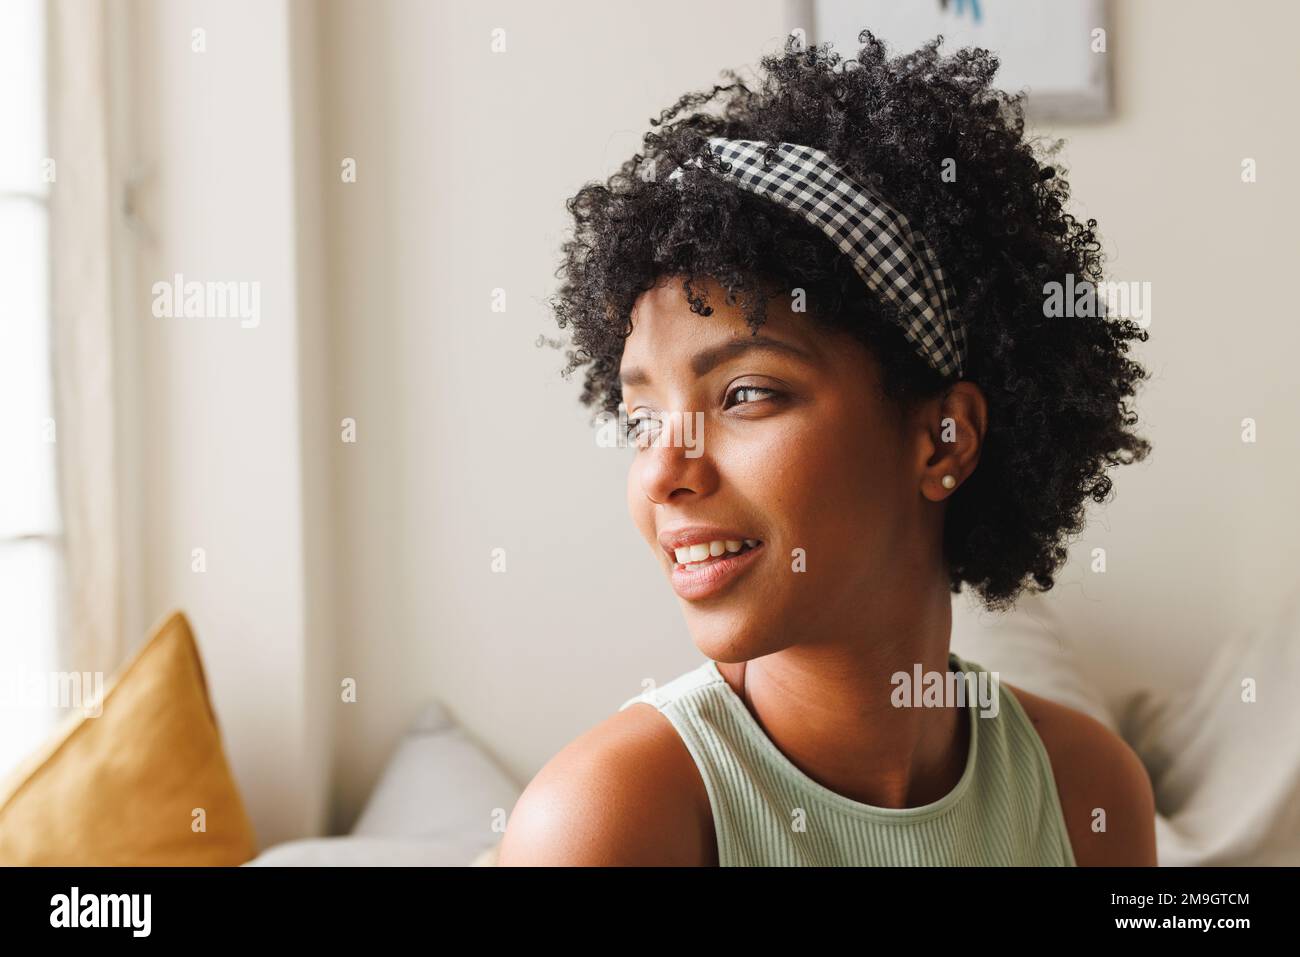 Close-up of thoughtful biracial young woman with afro hair looking away against white wall at home Stock Photo